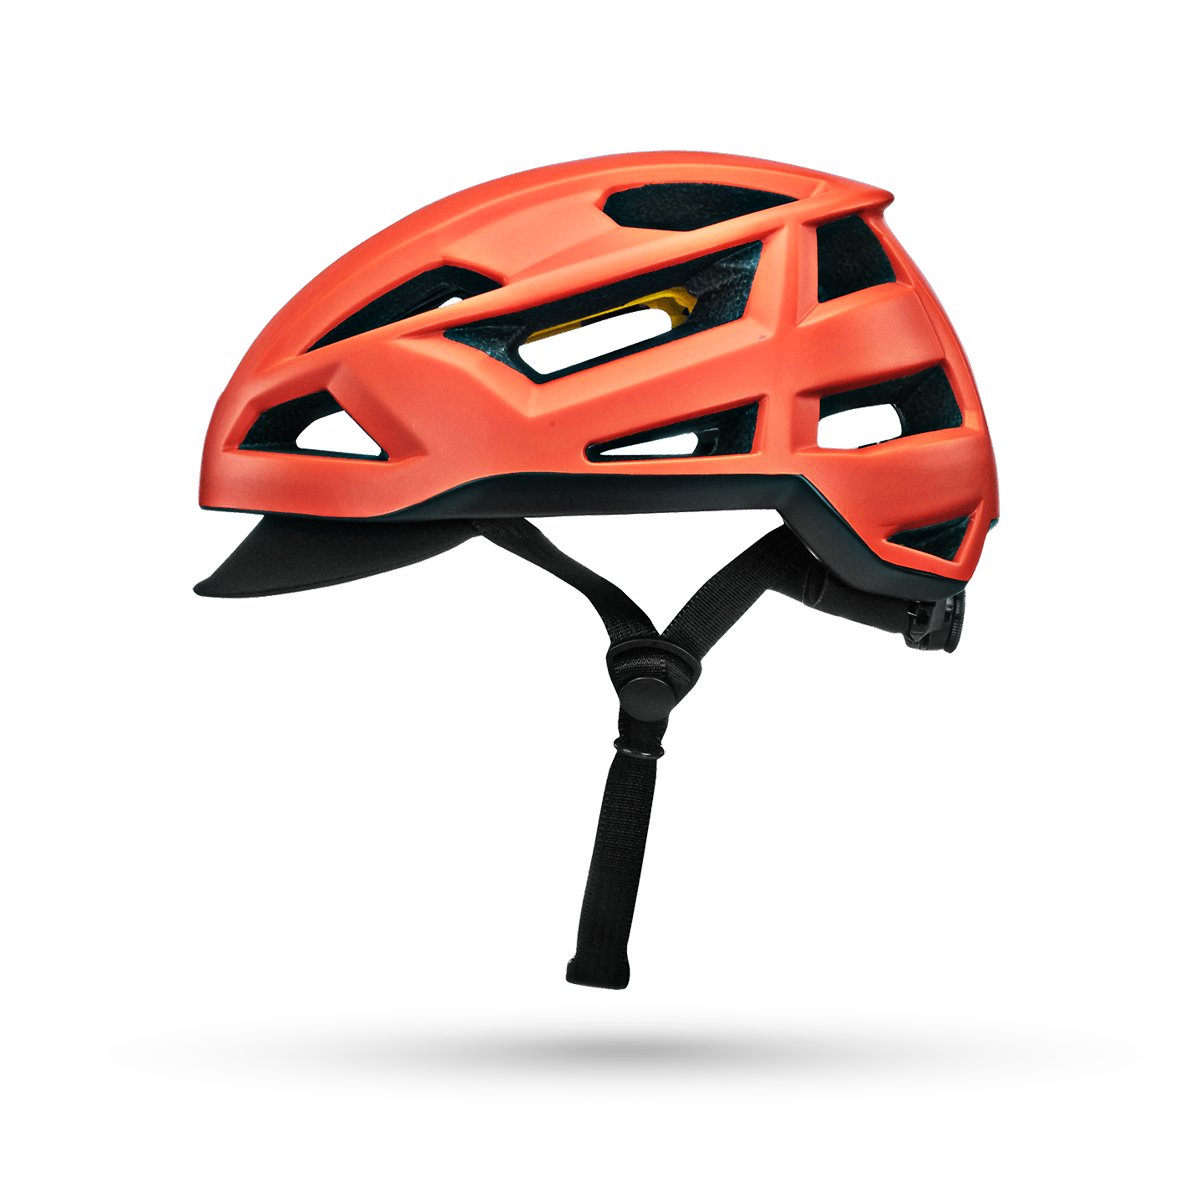 Bern FL-1 Pavé MIPS - Urban Performance | Superhuman | Fully-Capped In-Mold PC shell 